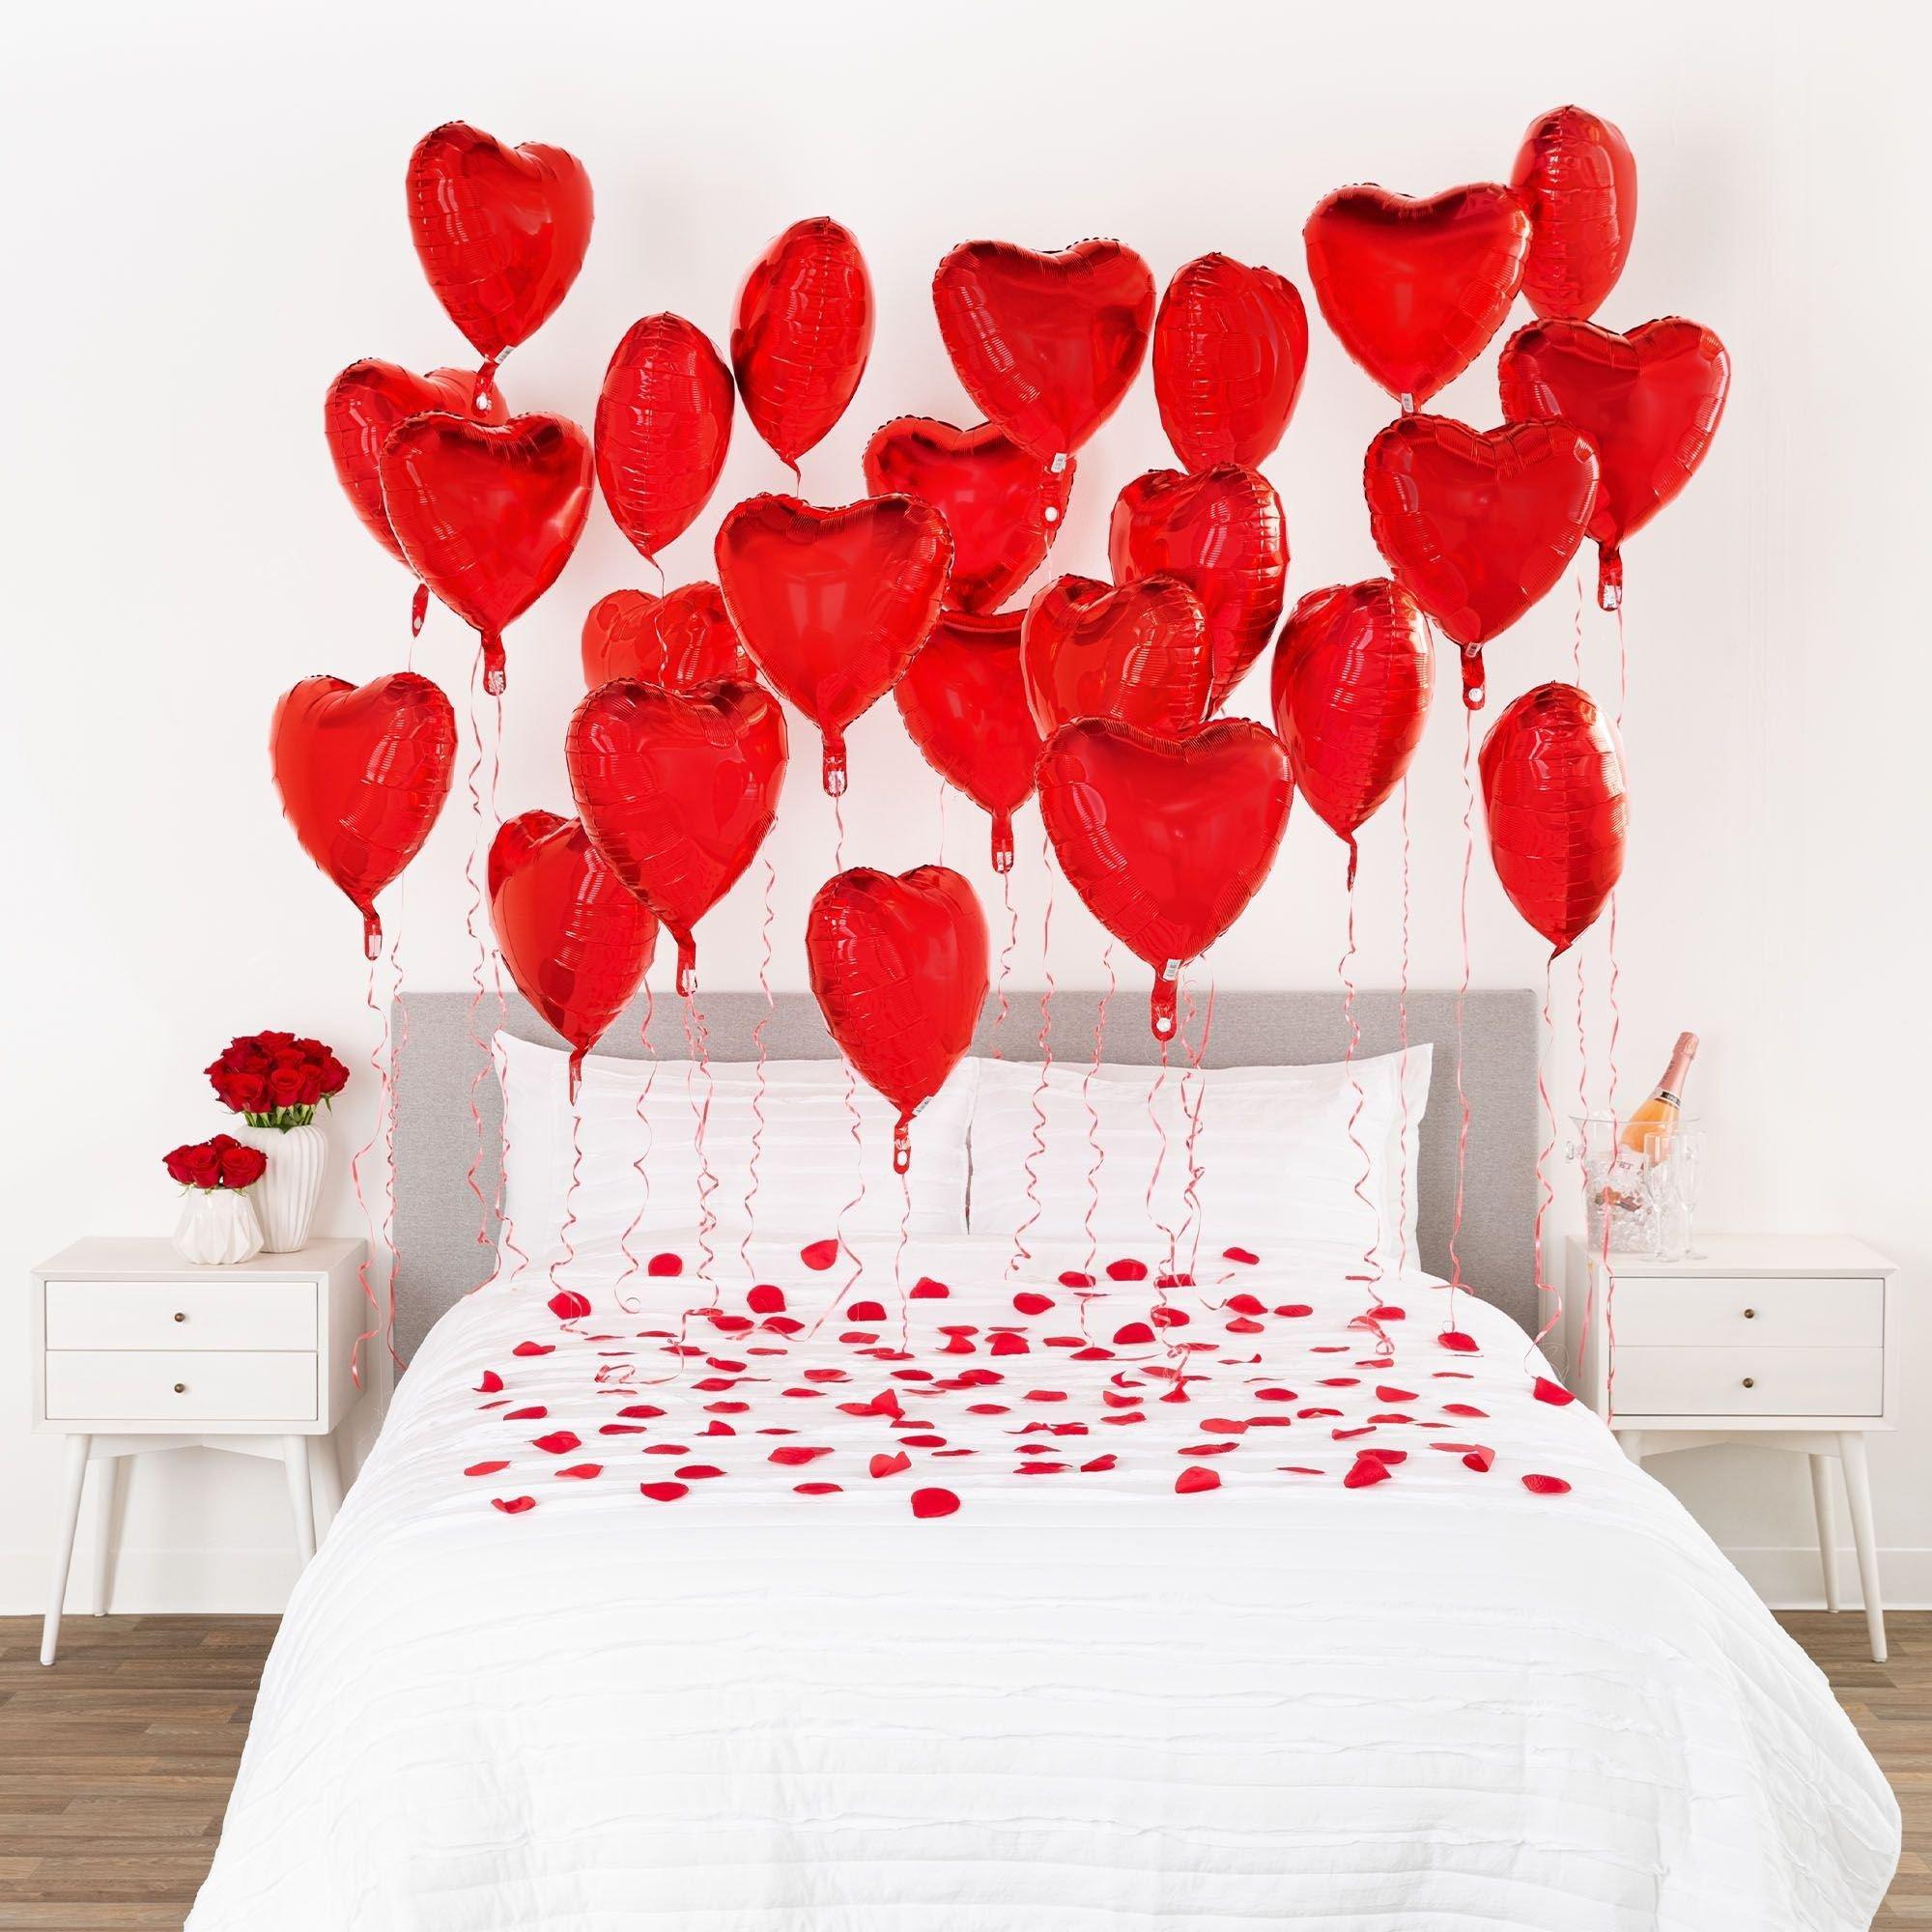 DIY Red Hearts & Rose Petals Room Decorating Kit, 25pc | Party City